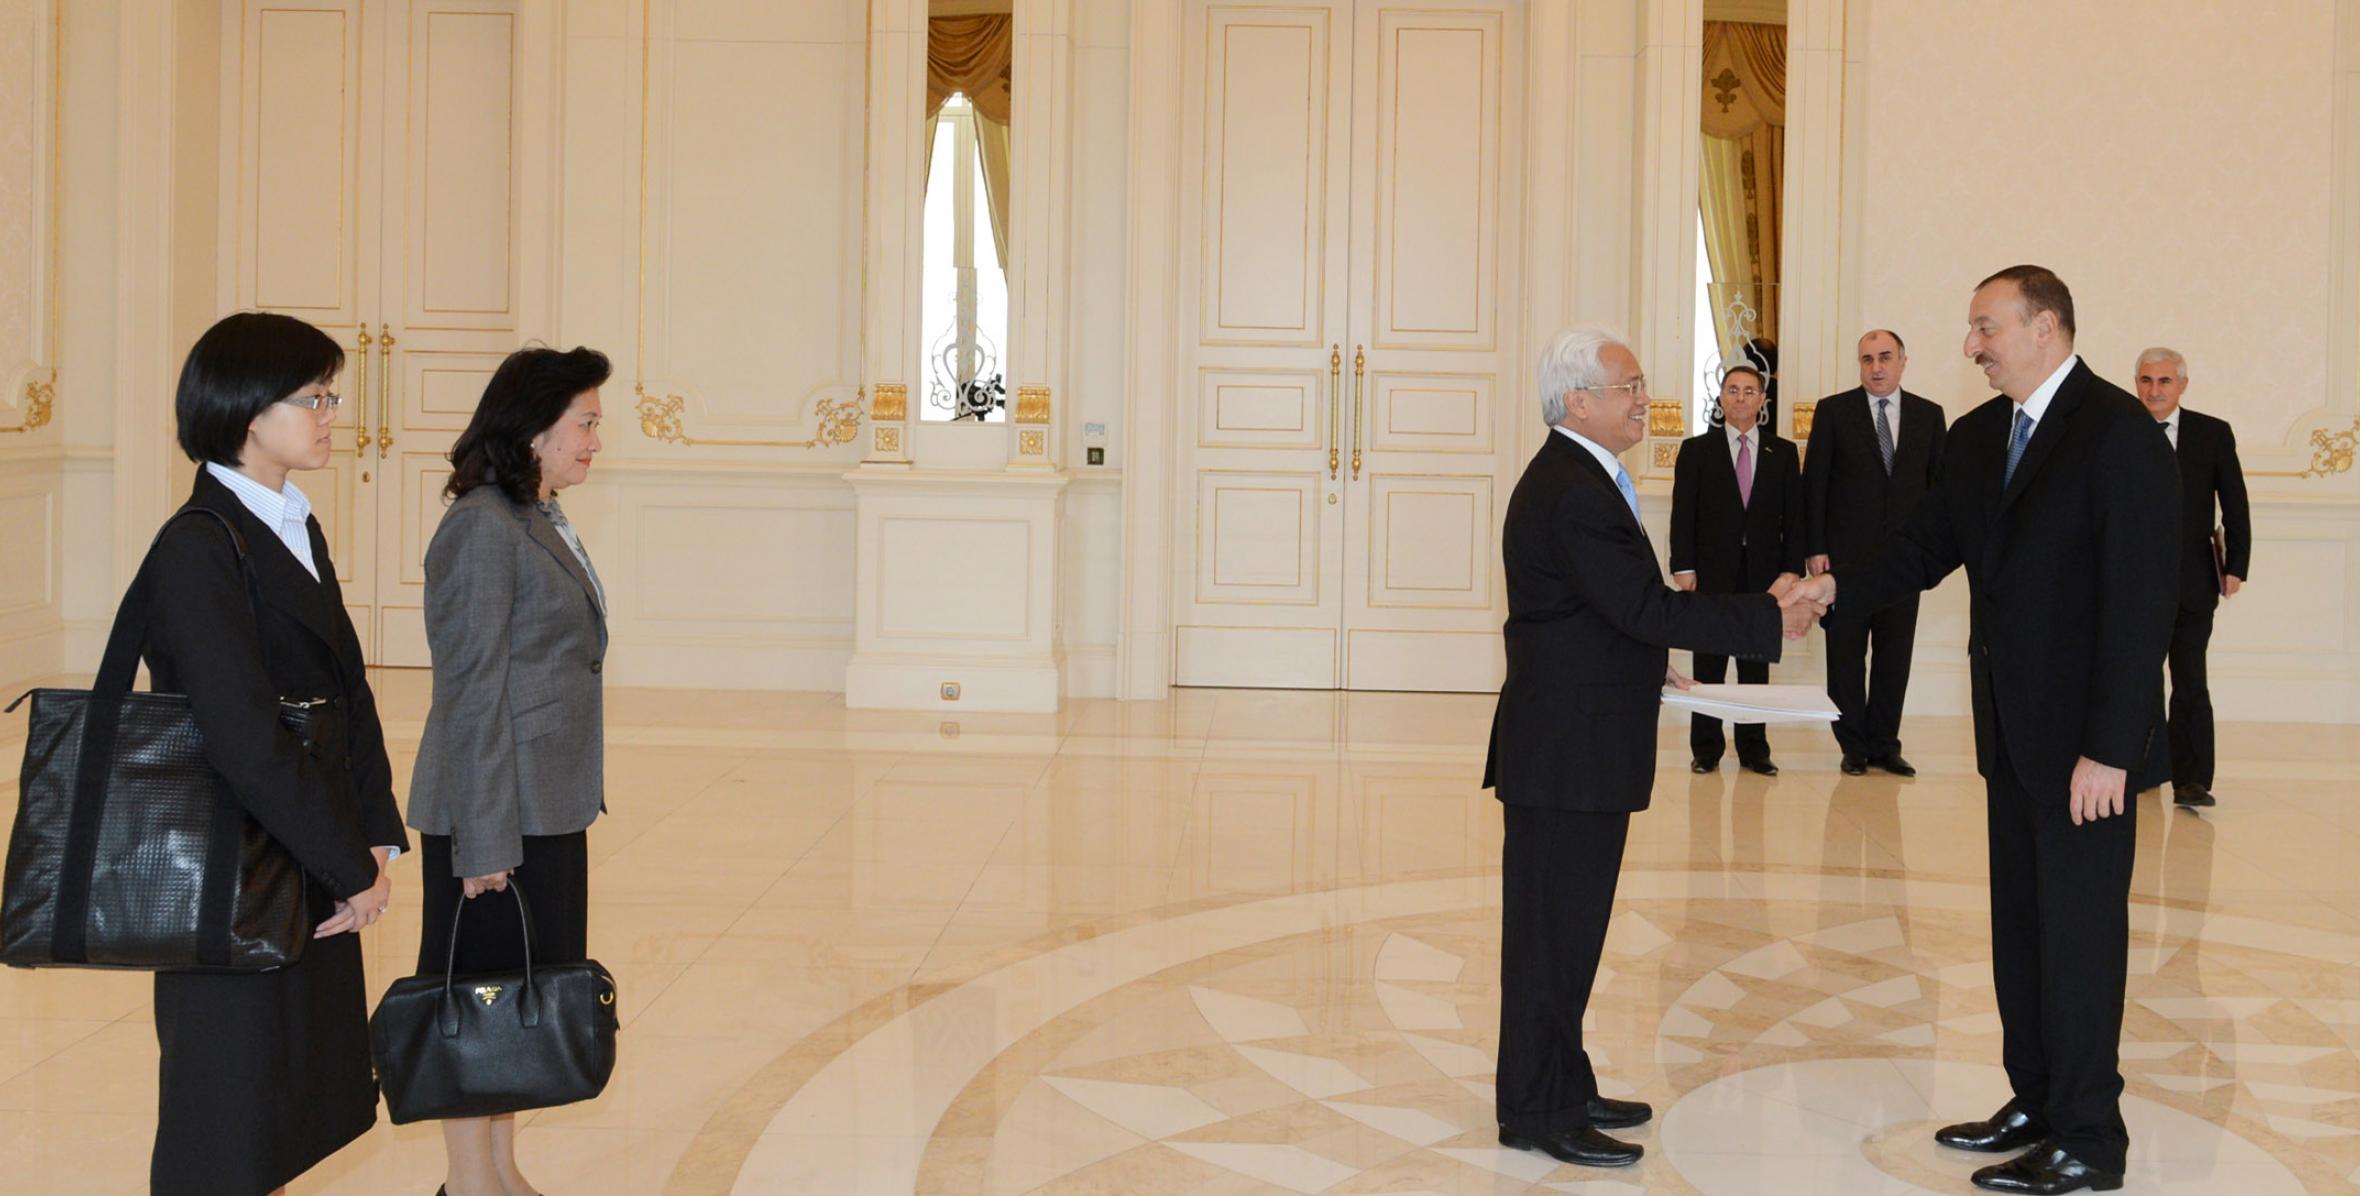 Ilham Aliyev accepted the credentials from the newly-appointed Ambassador of the Kingdom of Thailand to Azerbaijan